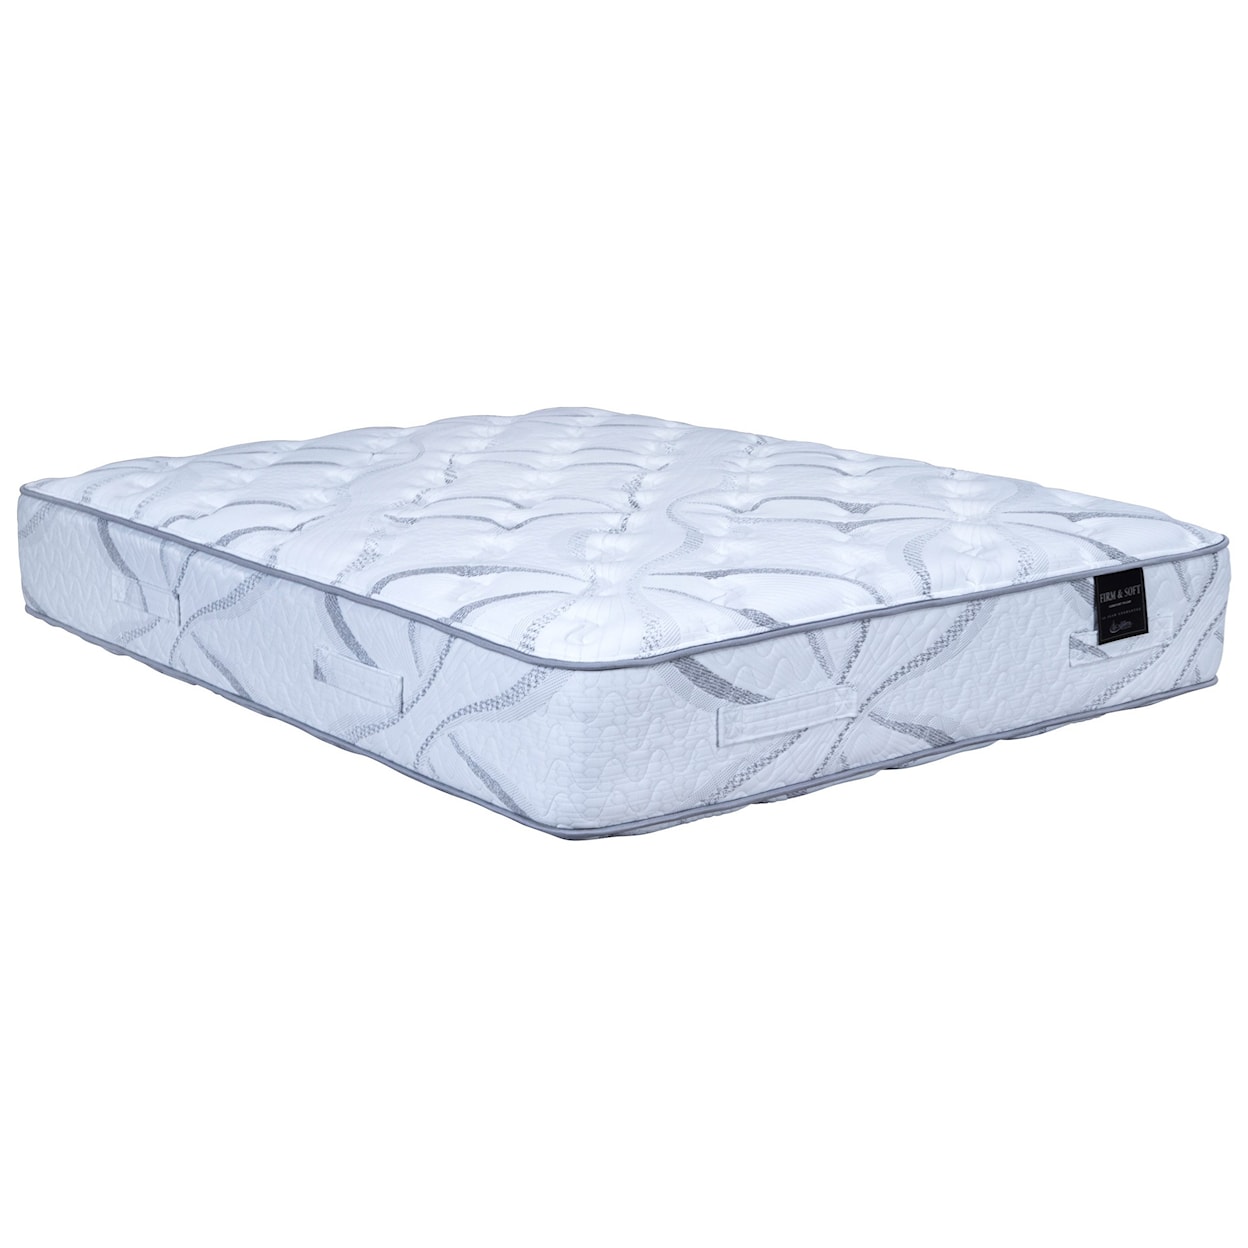 Capitol Bedding Firm and Soft II Plush Full Two Sided Plush Mattress